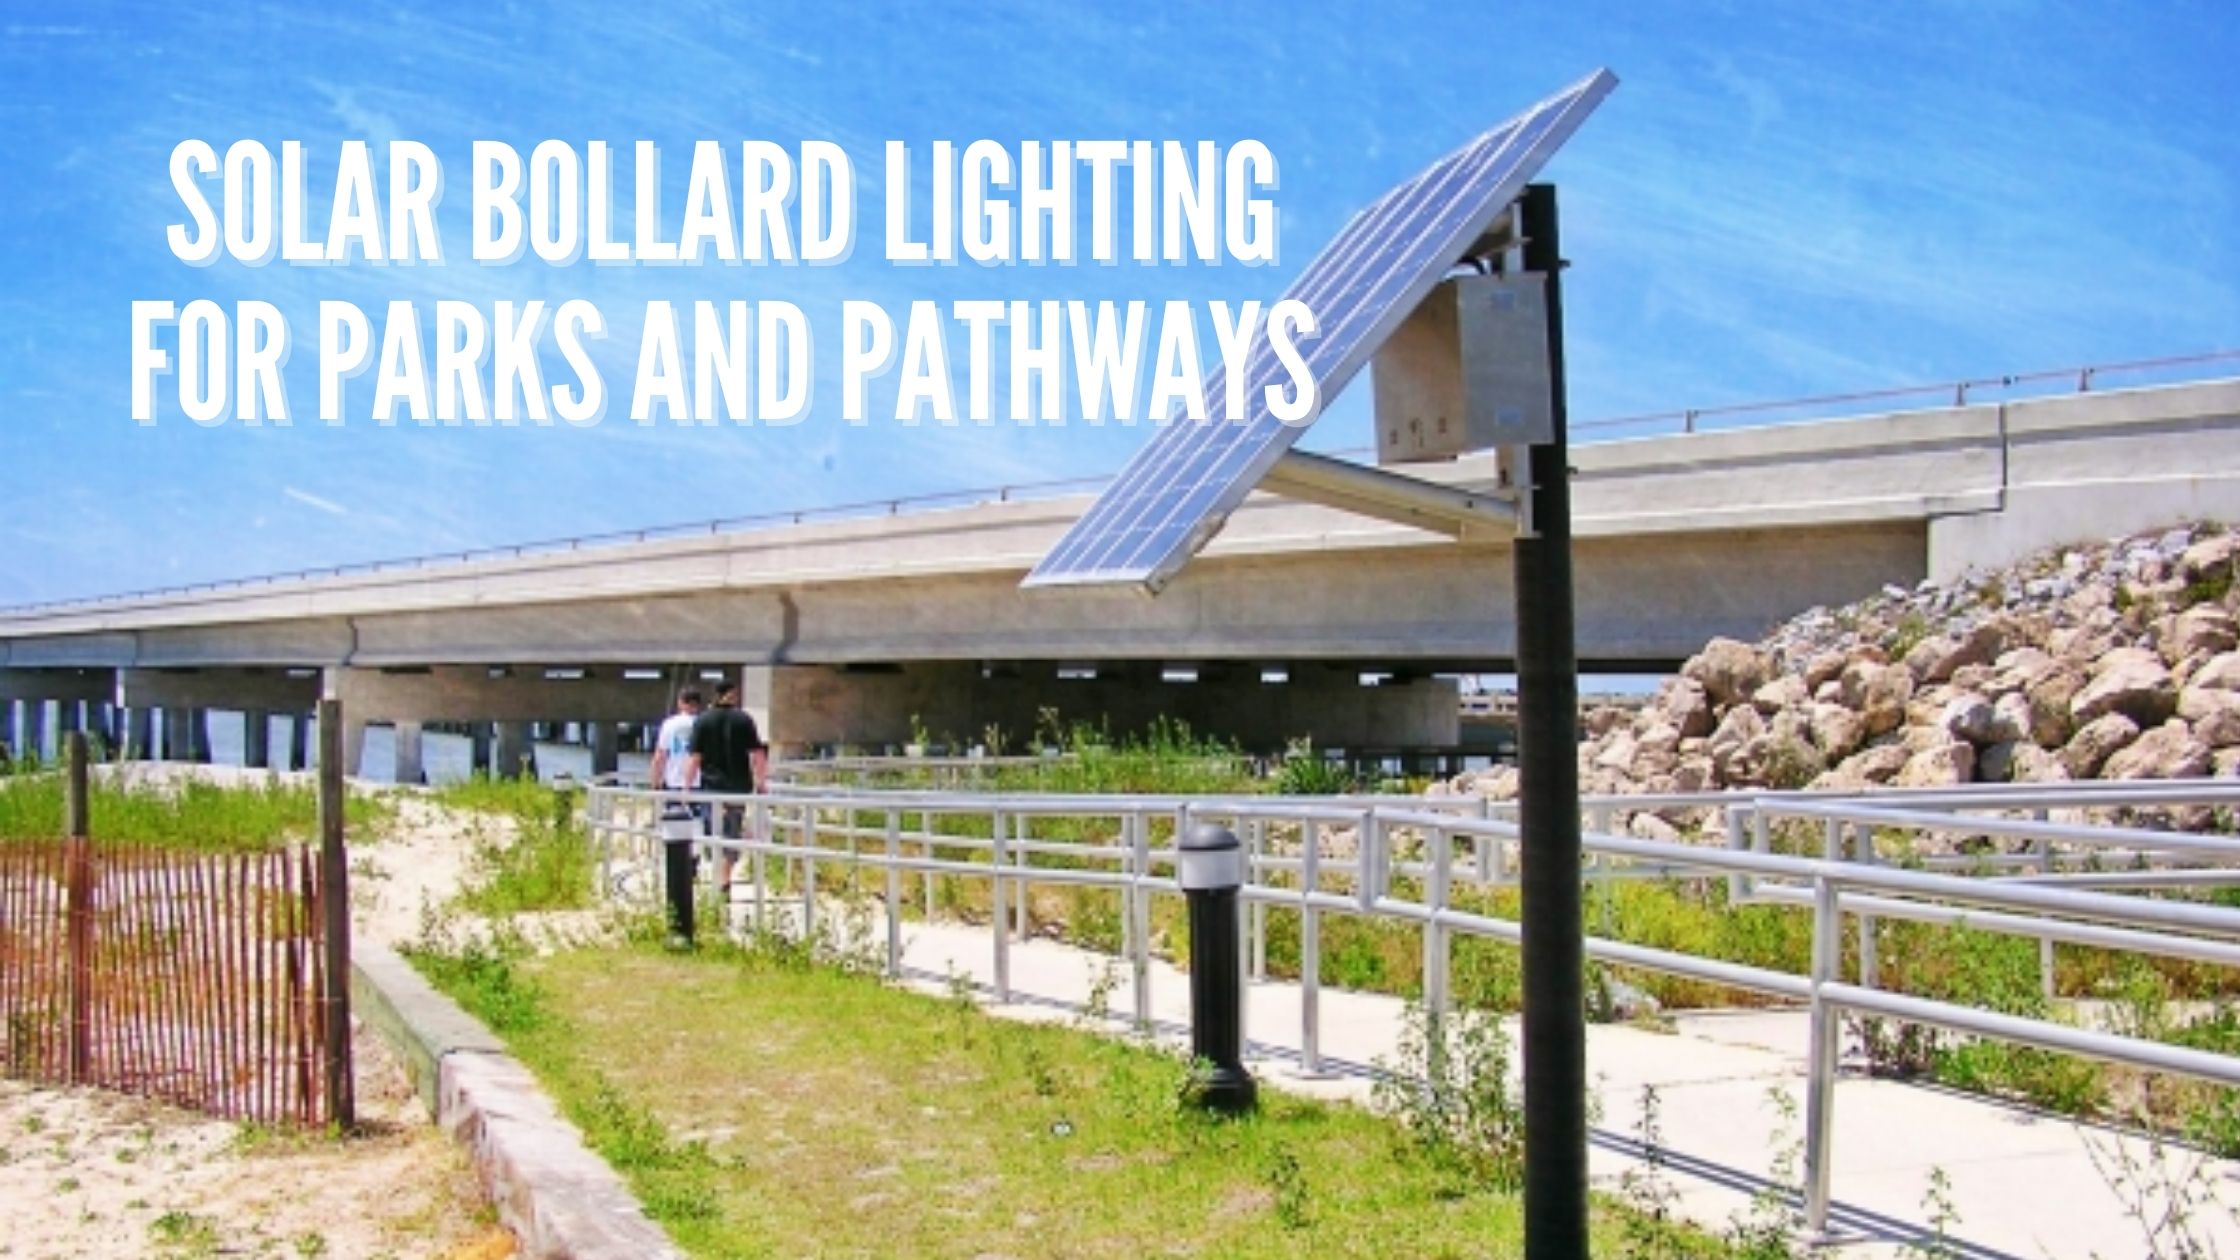 Solar Bollard Lighting for Parks and Pathways